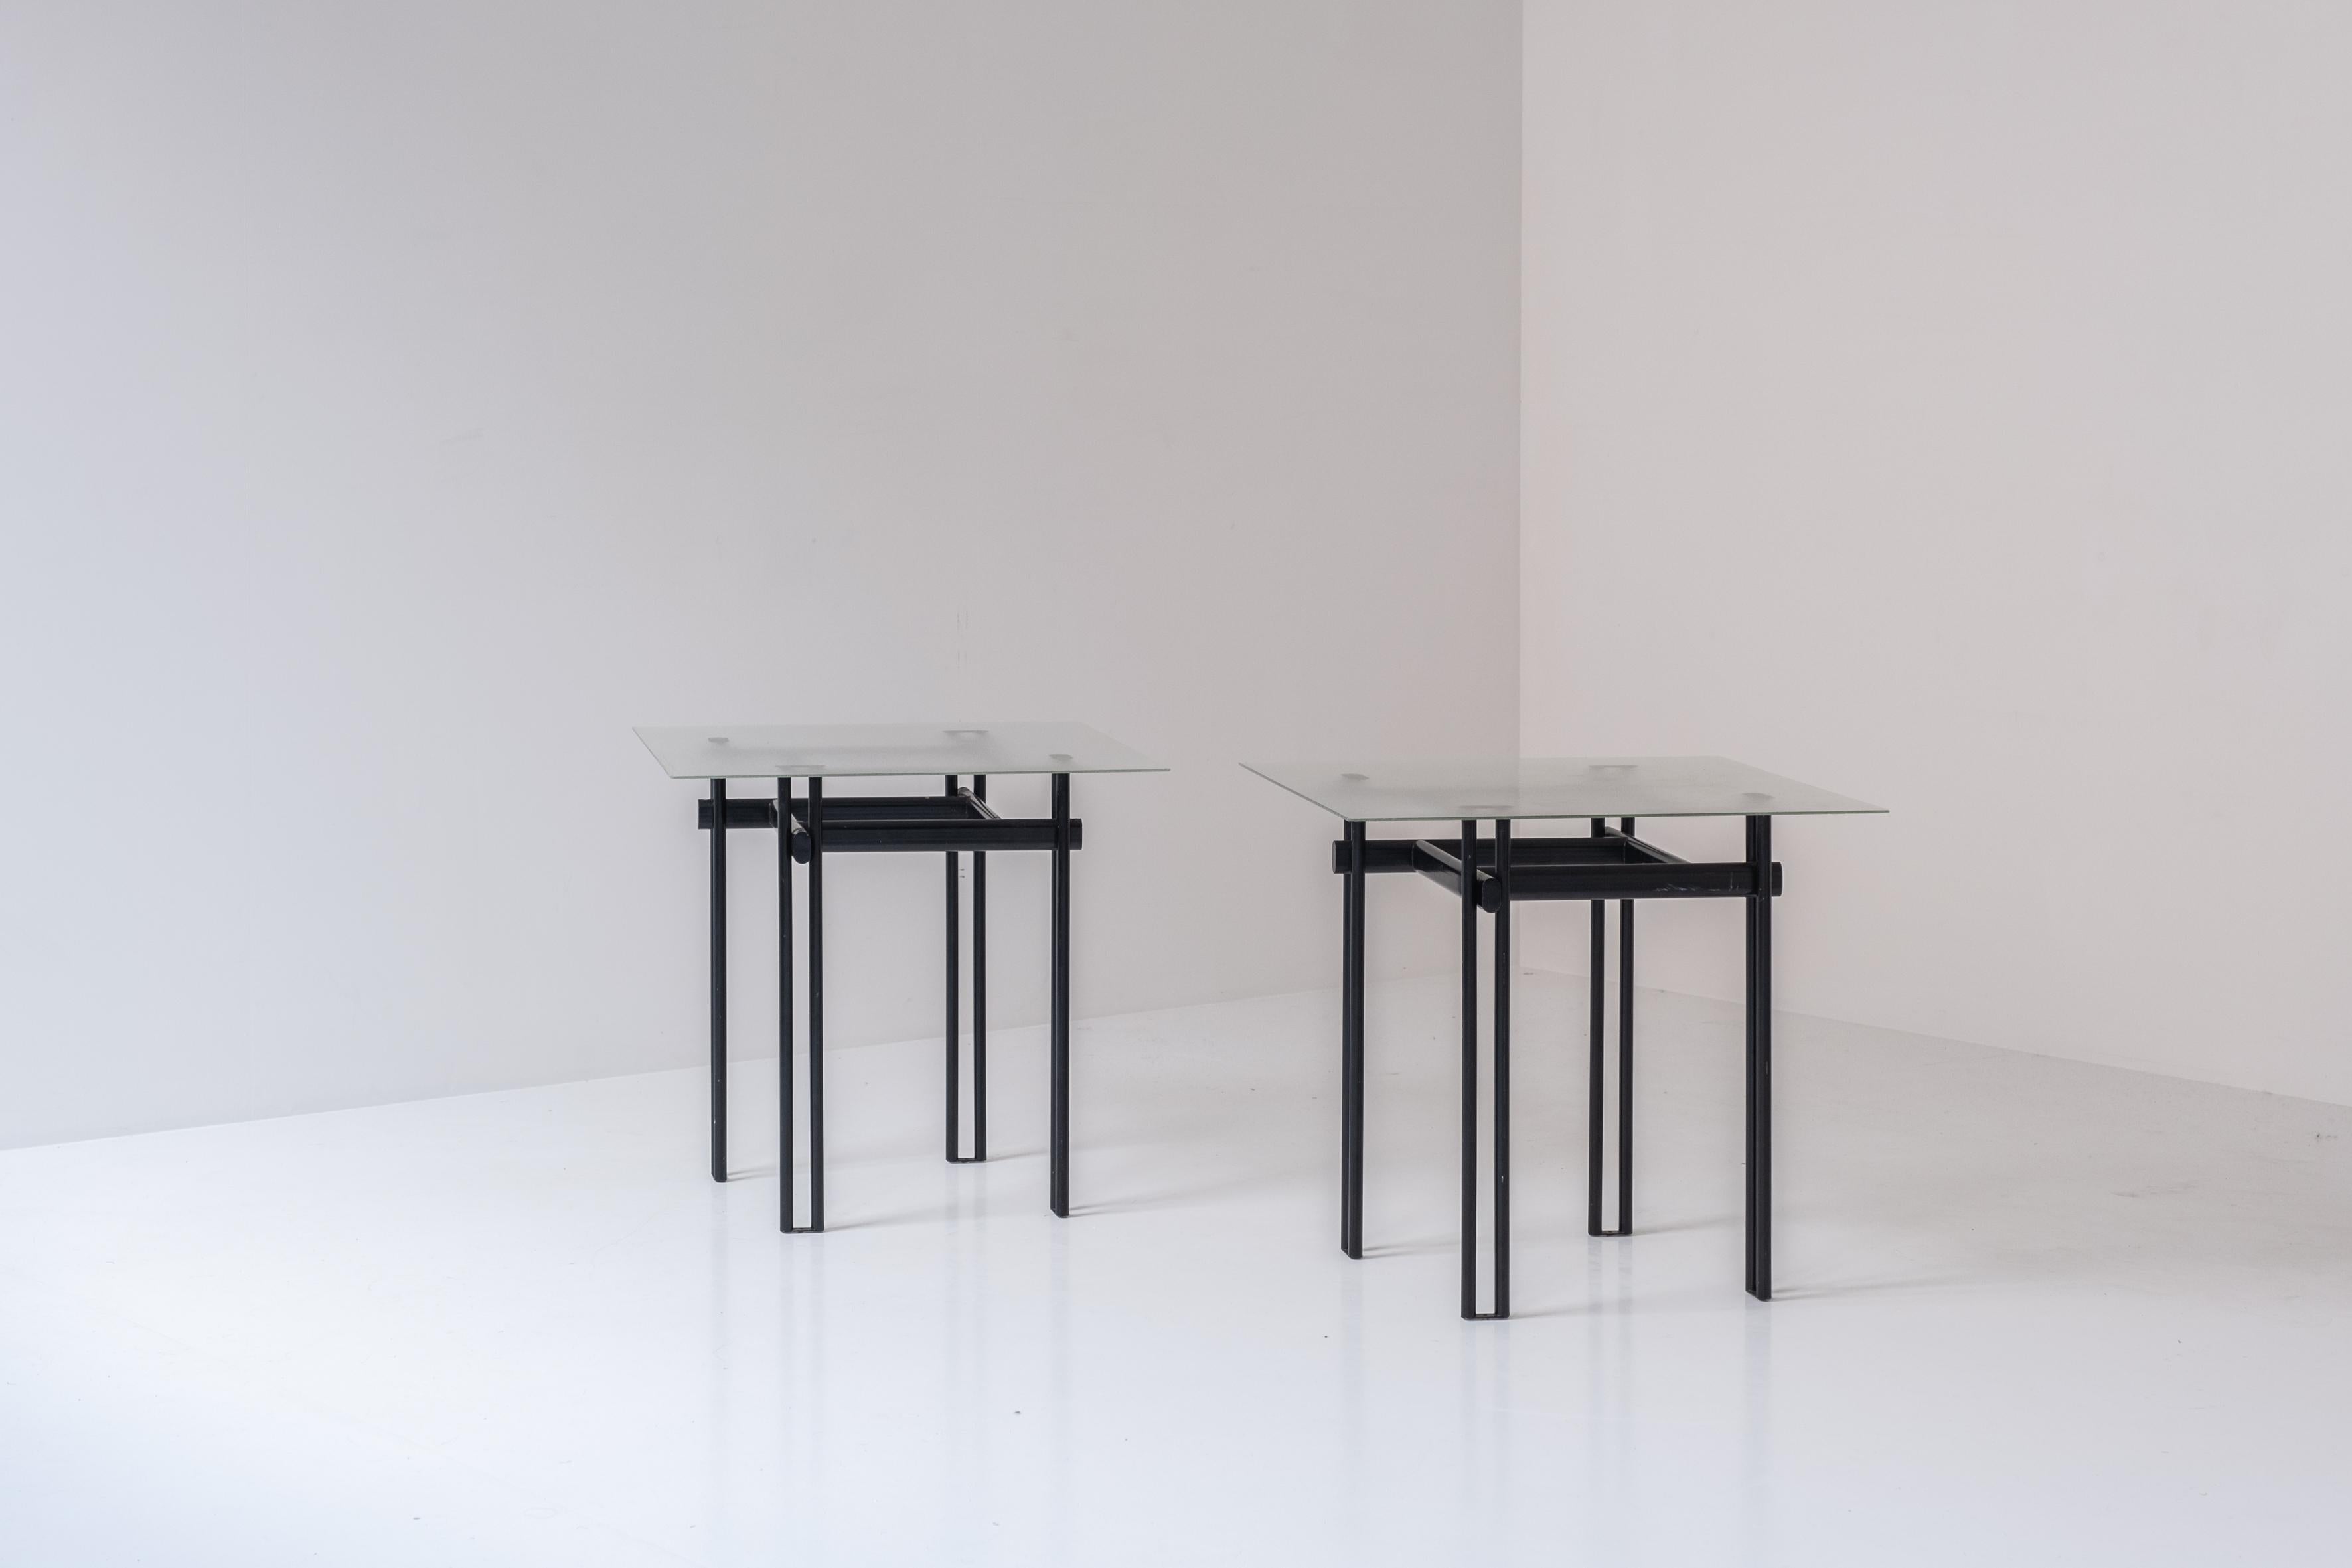 Minimal pair of identical side tables from Belgium, designed and manufactured in the 1980s. This pair features black lacquered steel frames with square frosted glas tops. Designer (for know) unknown. Presented in a good and original condition.